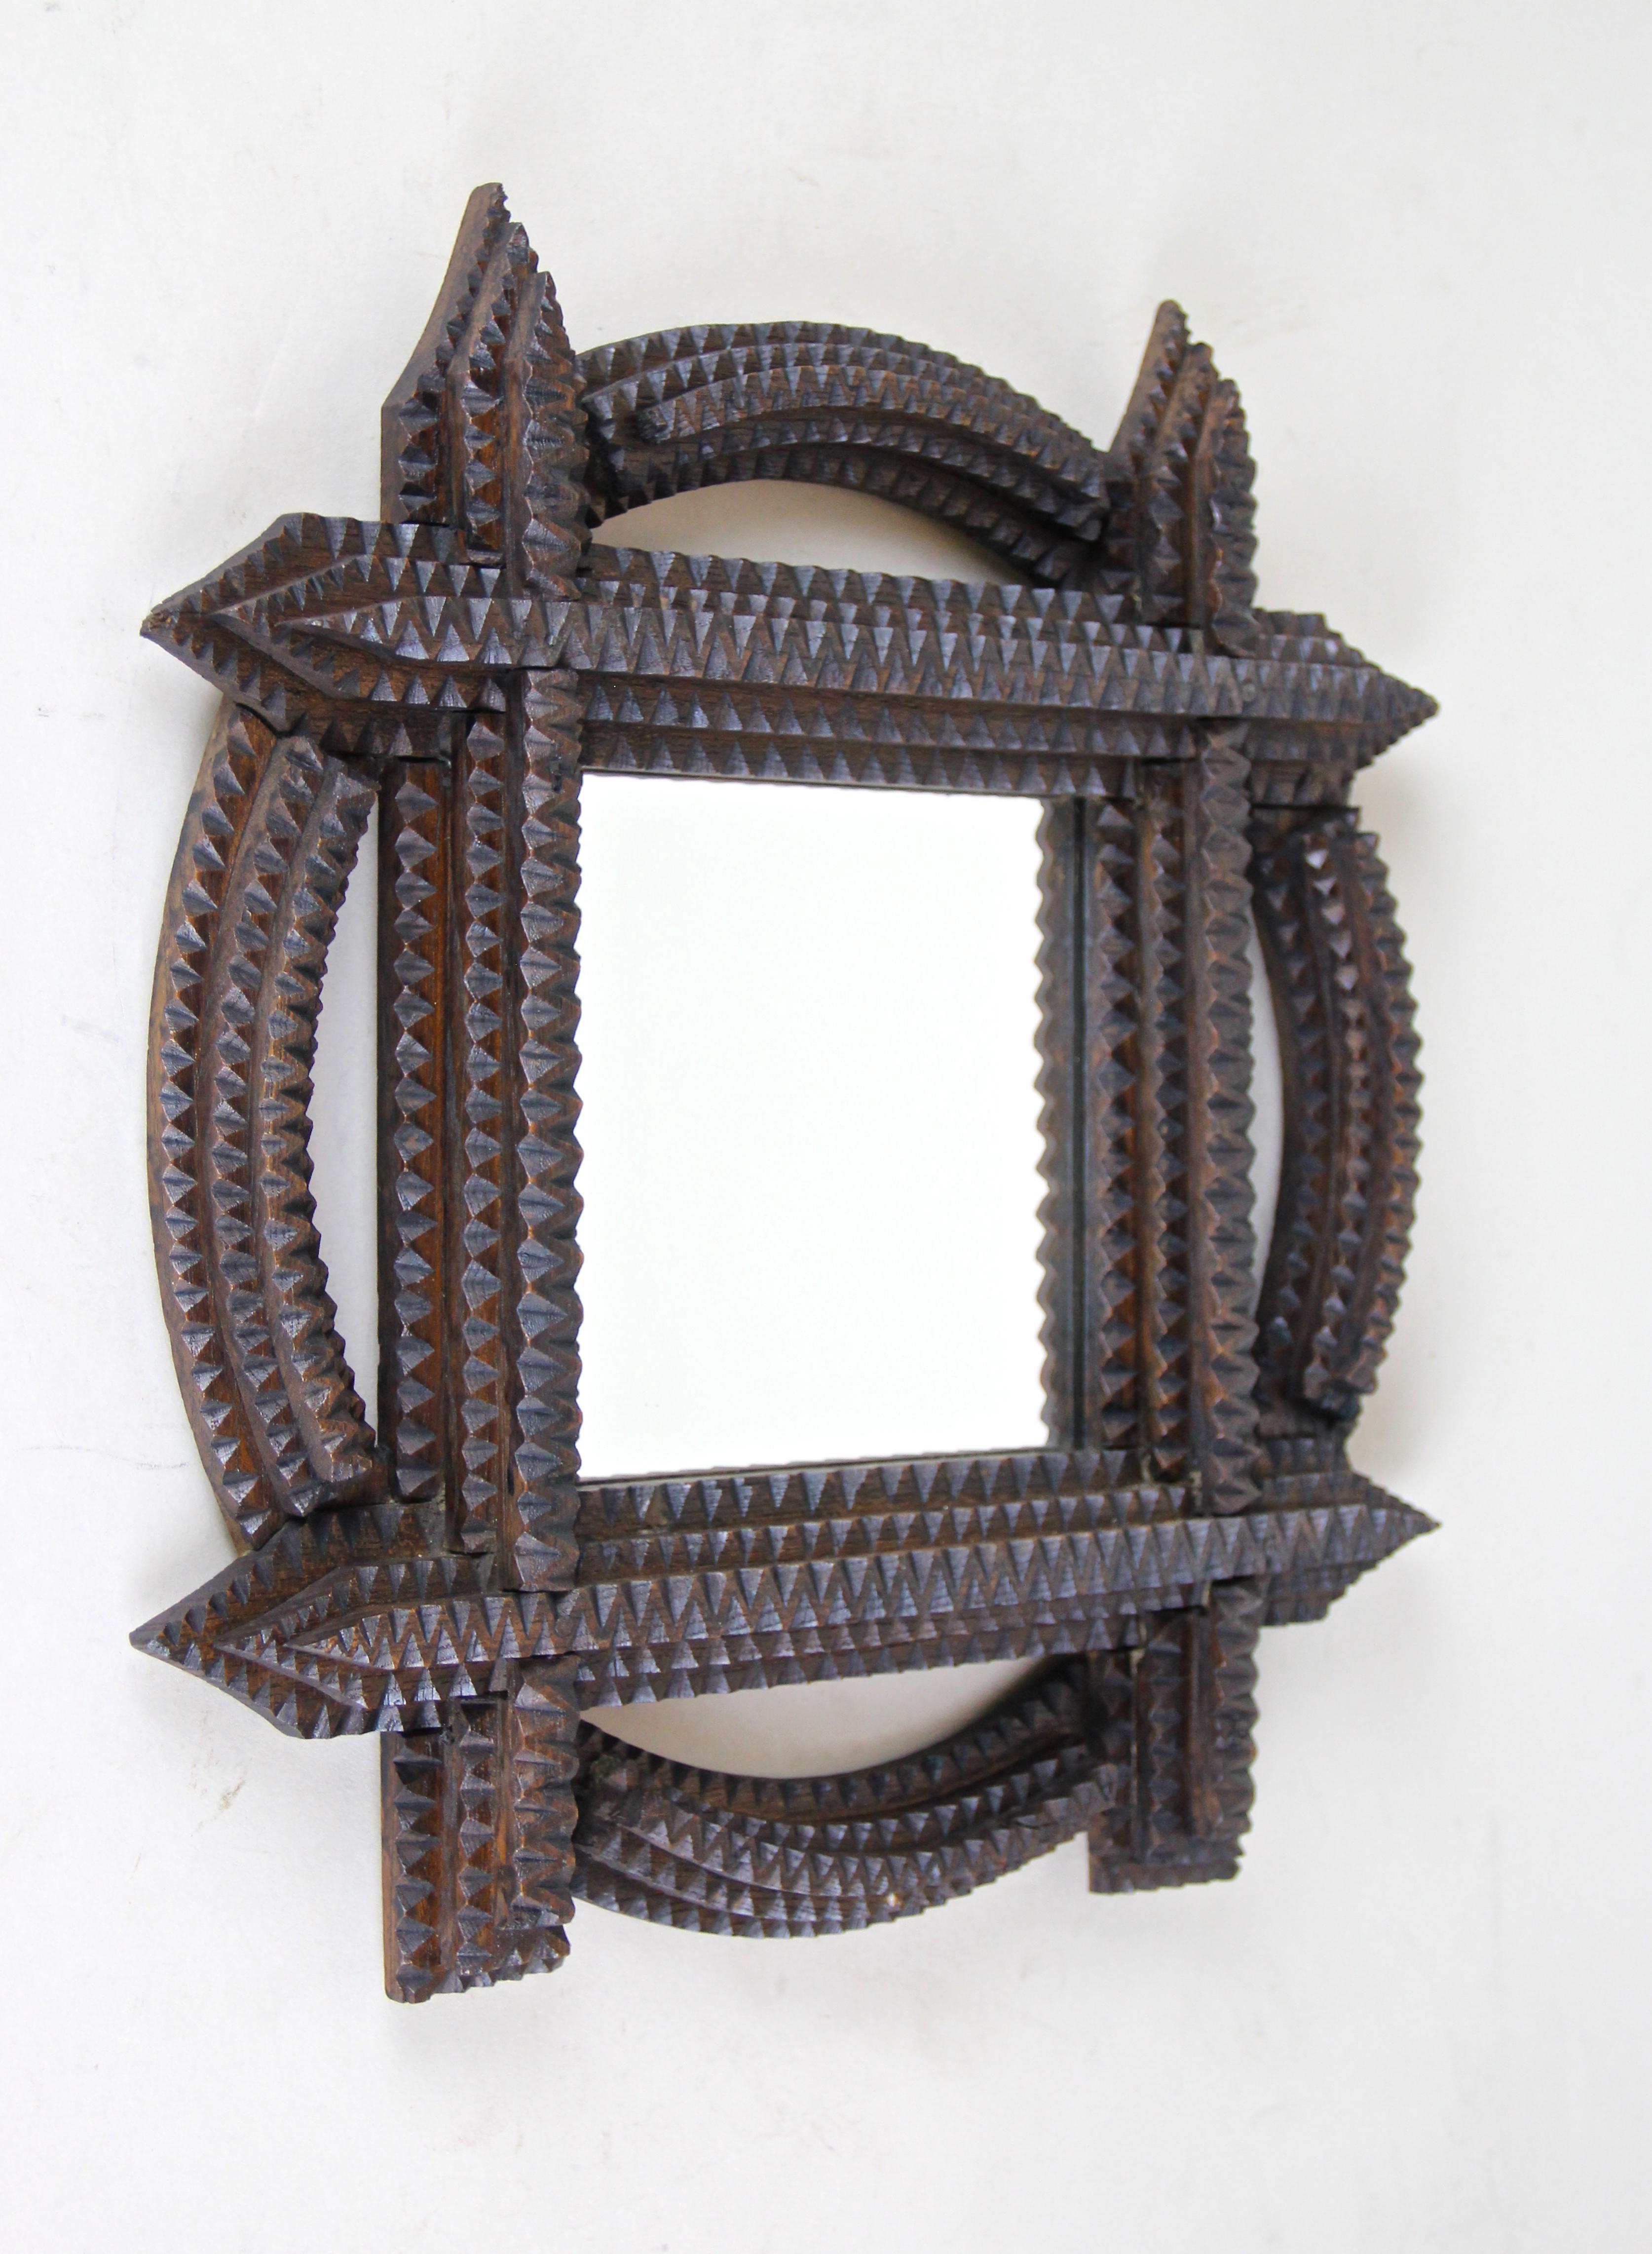 Extraordinary round tramp art wall mirror from the late 19th century in Austria. Made circa 1880, this rustic mirror has been elaborately made of fine basswood in the famous extensive 